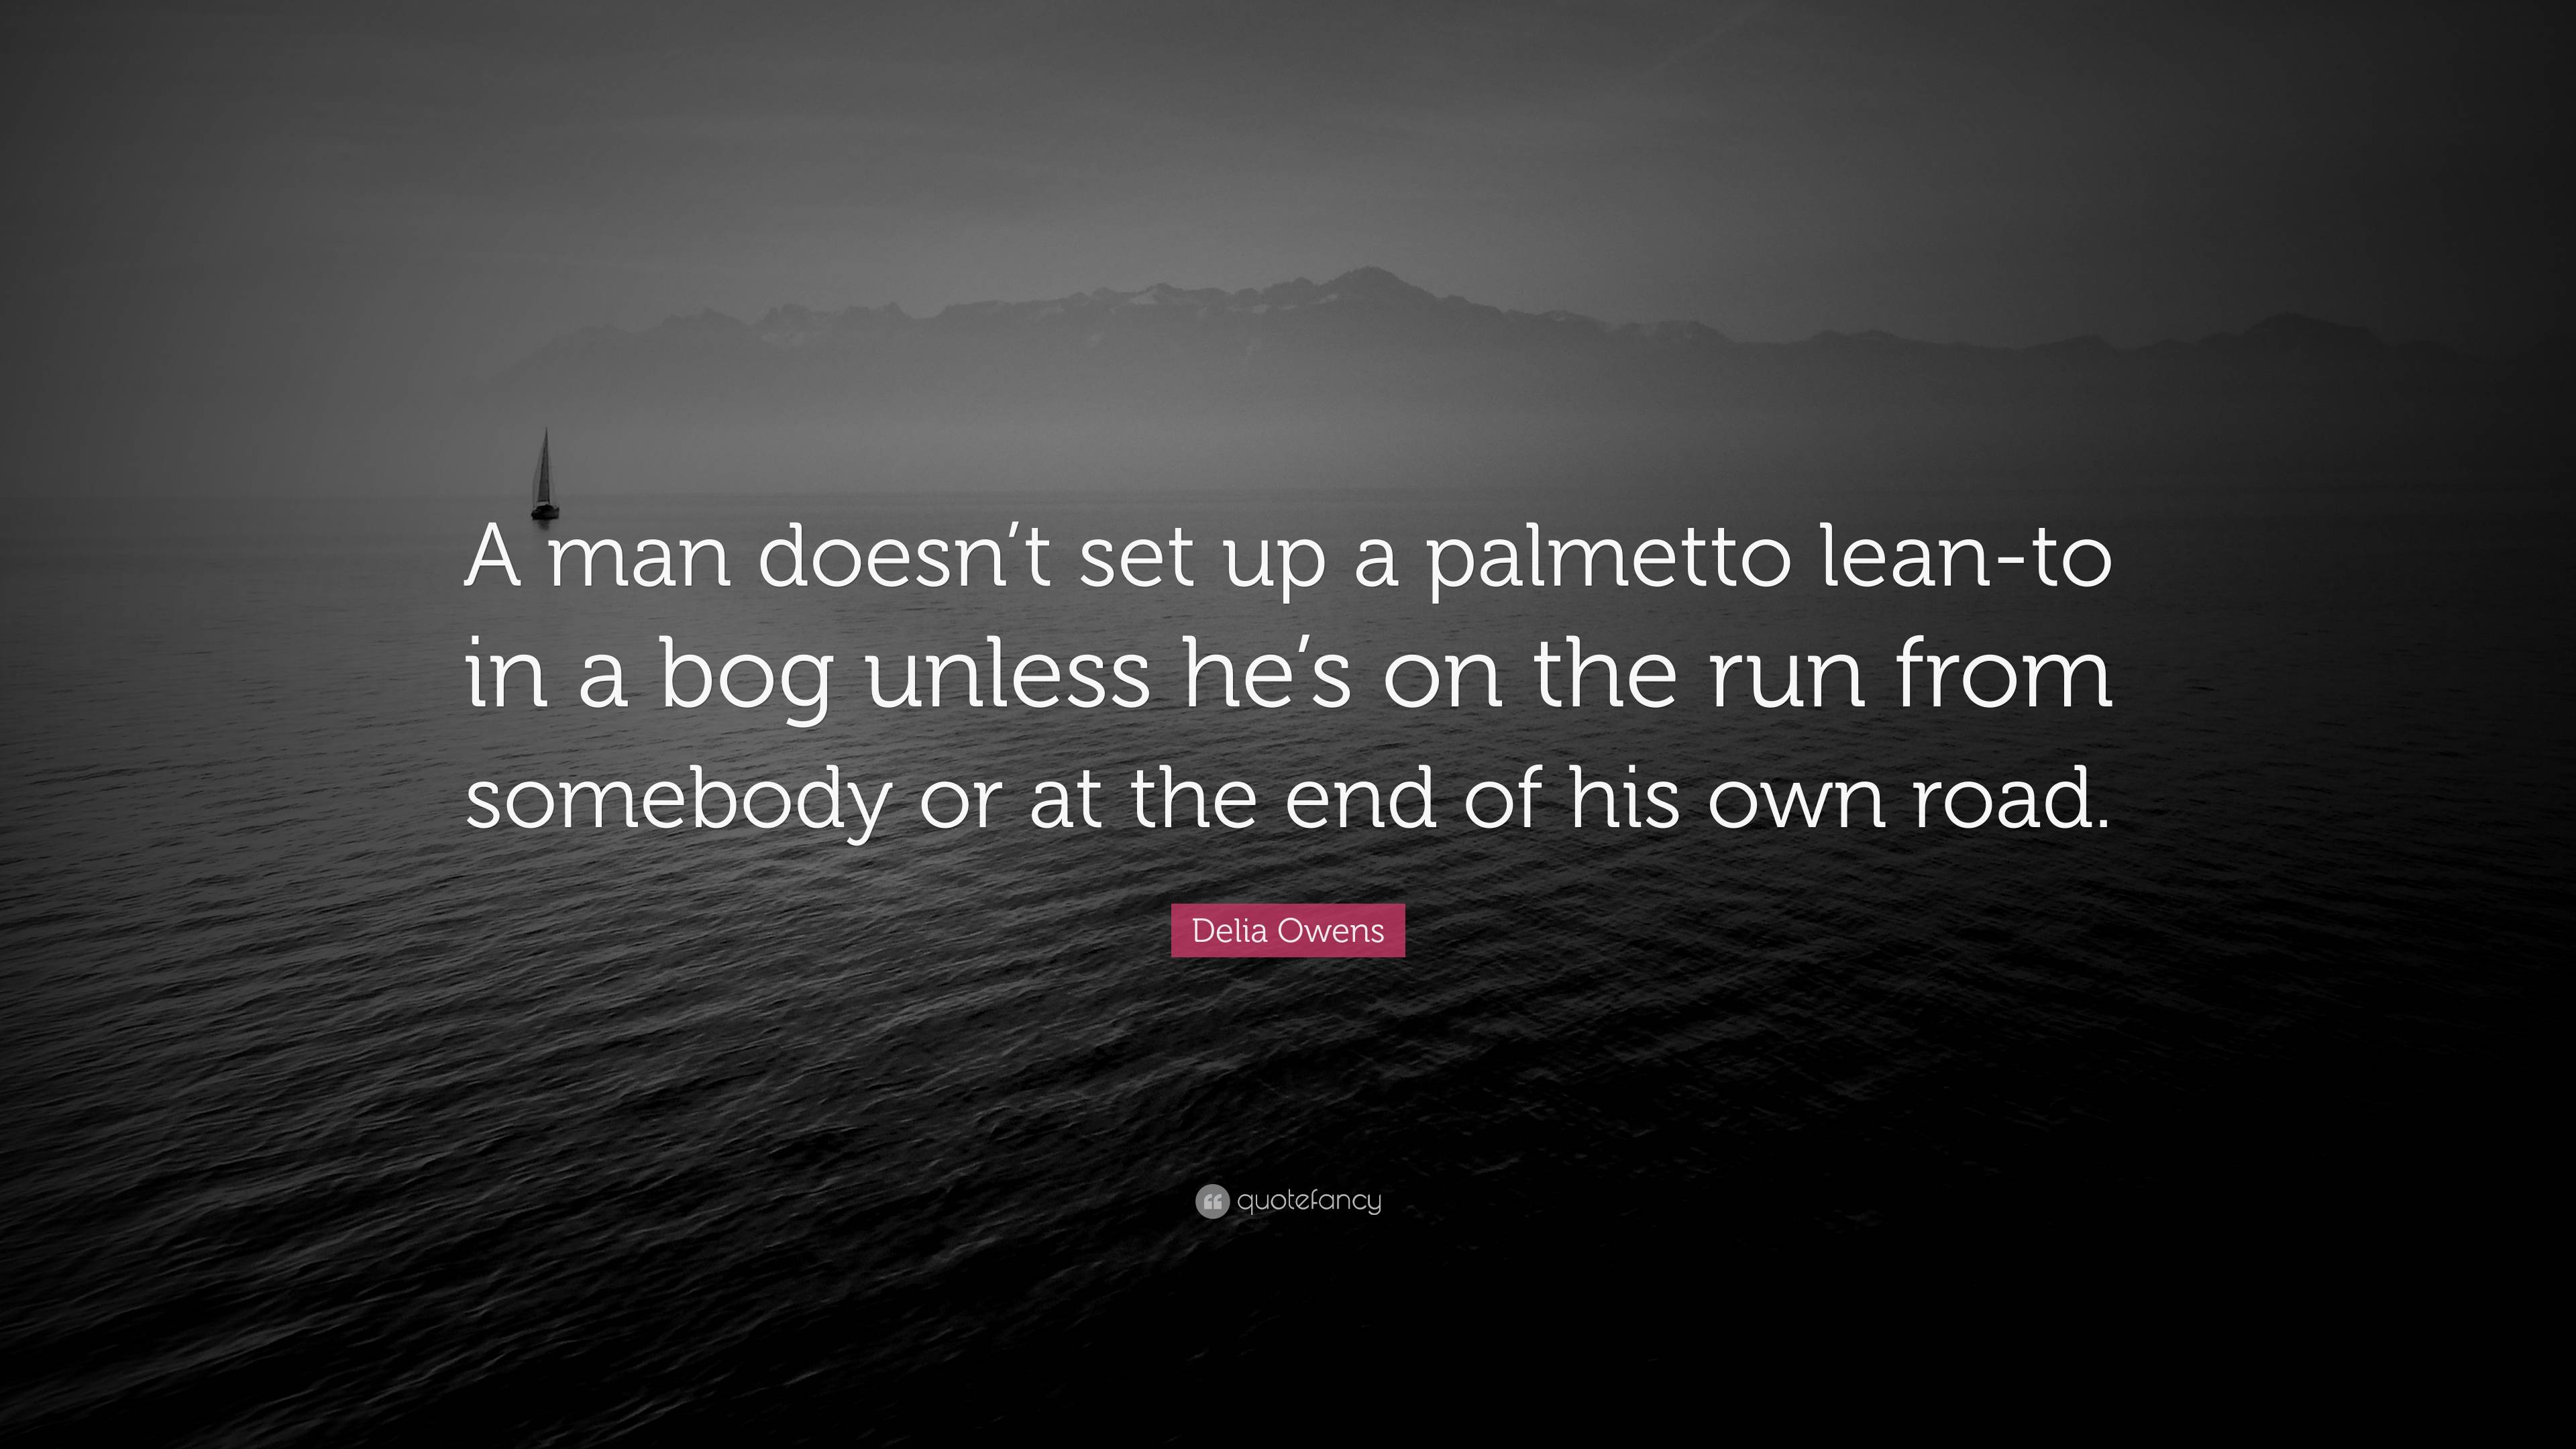 Delia Owens Quote: “A man doesn’t set up a palmetto lean-to in a bog ...